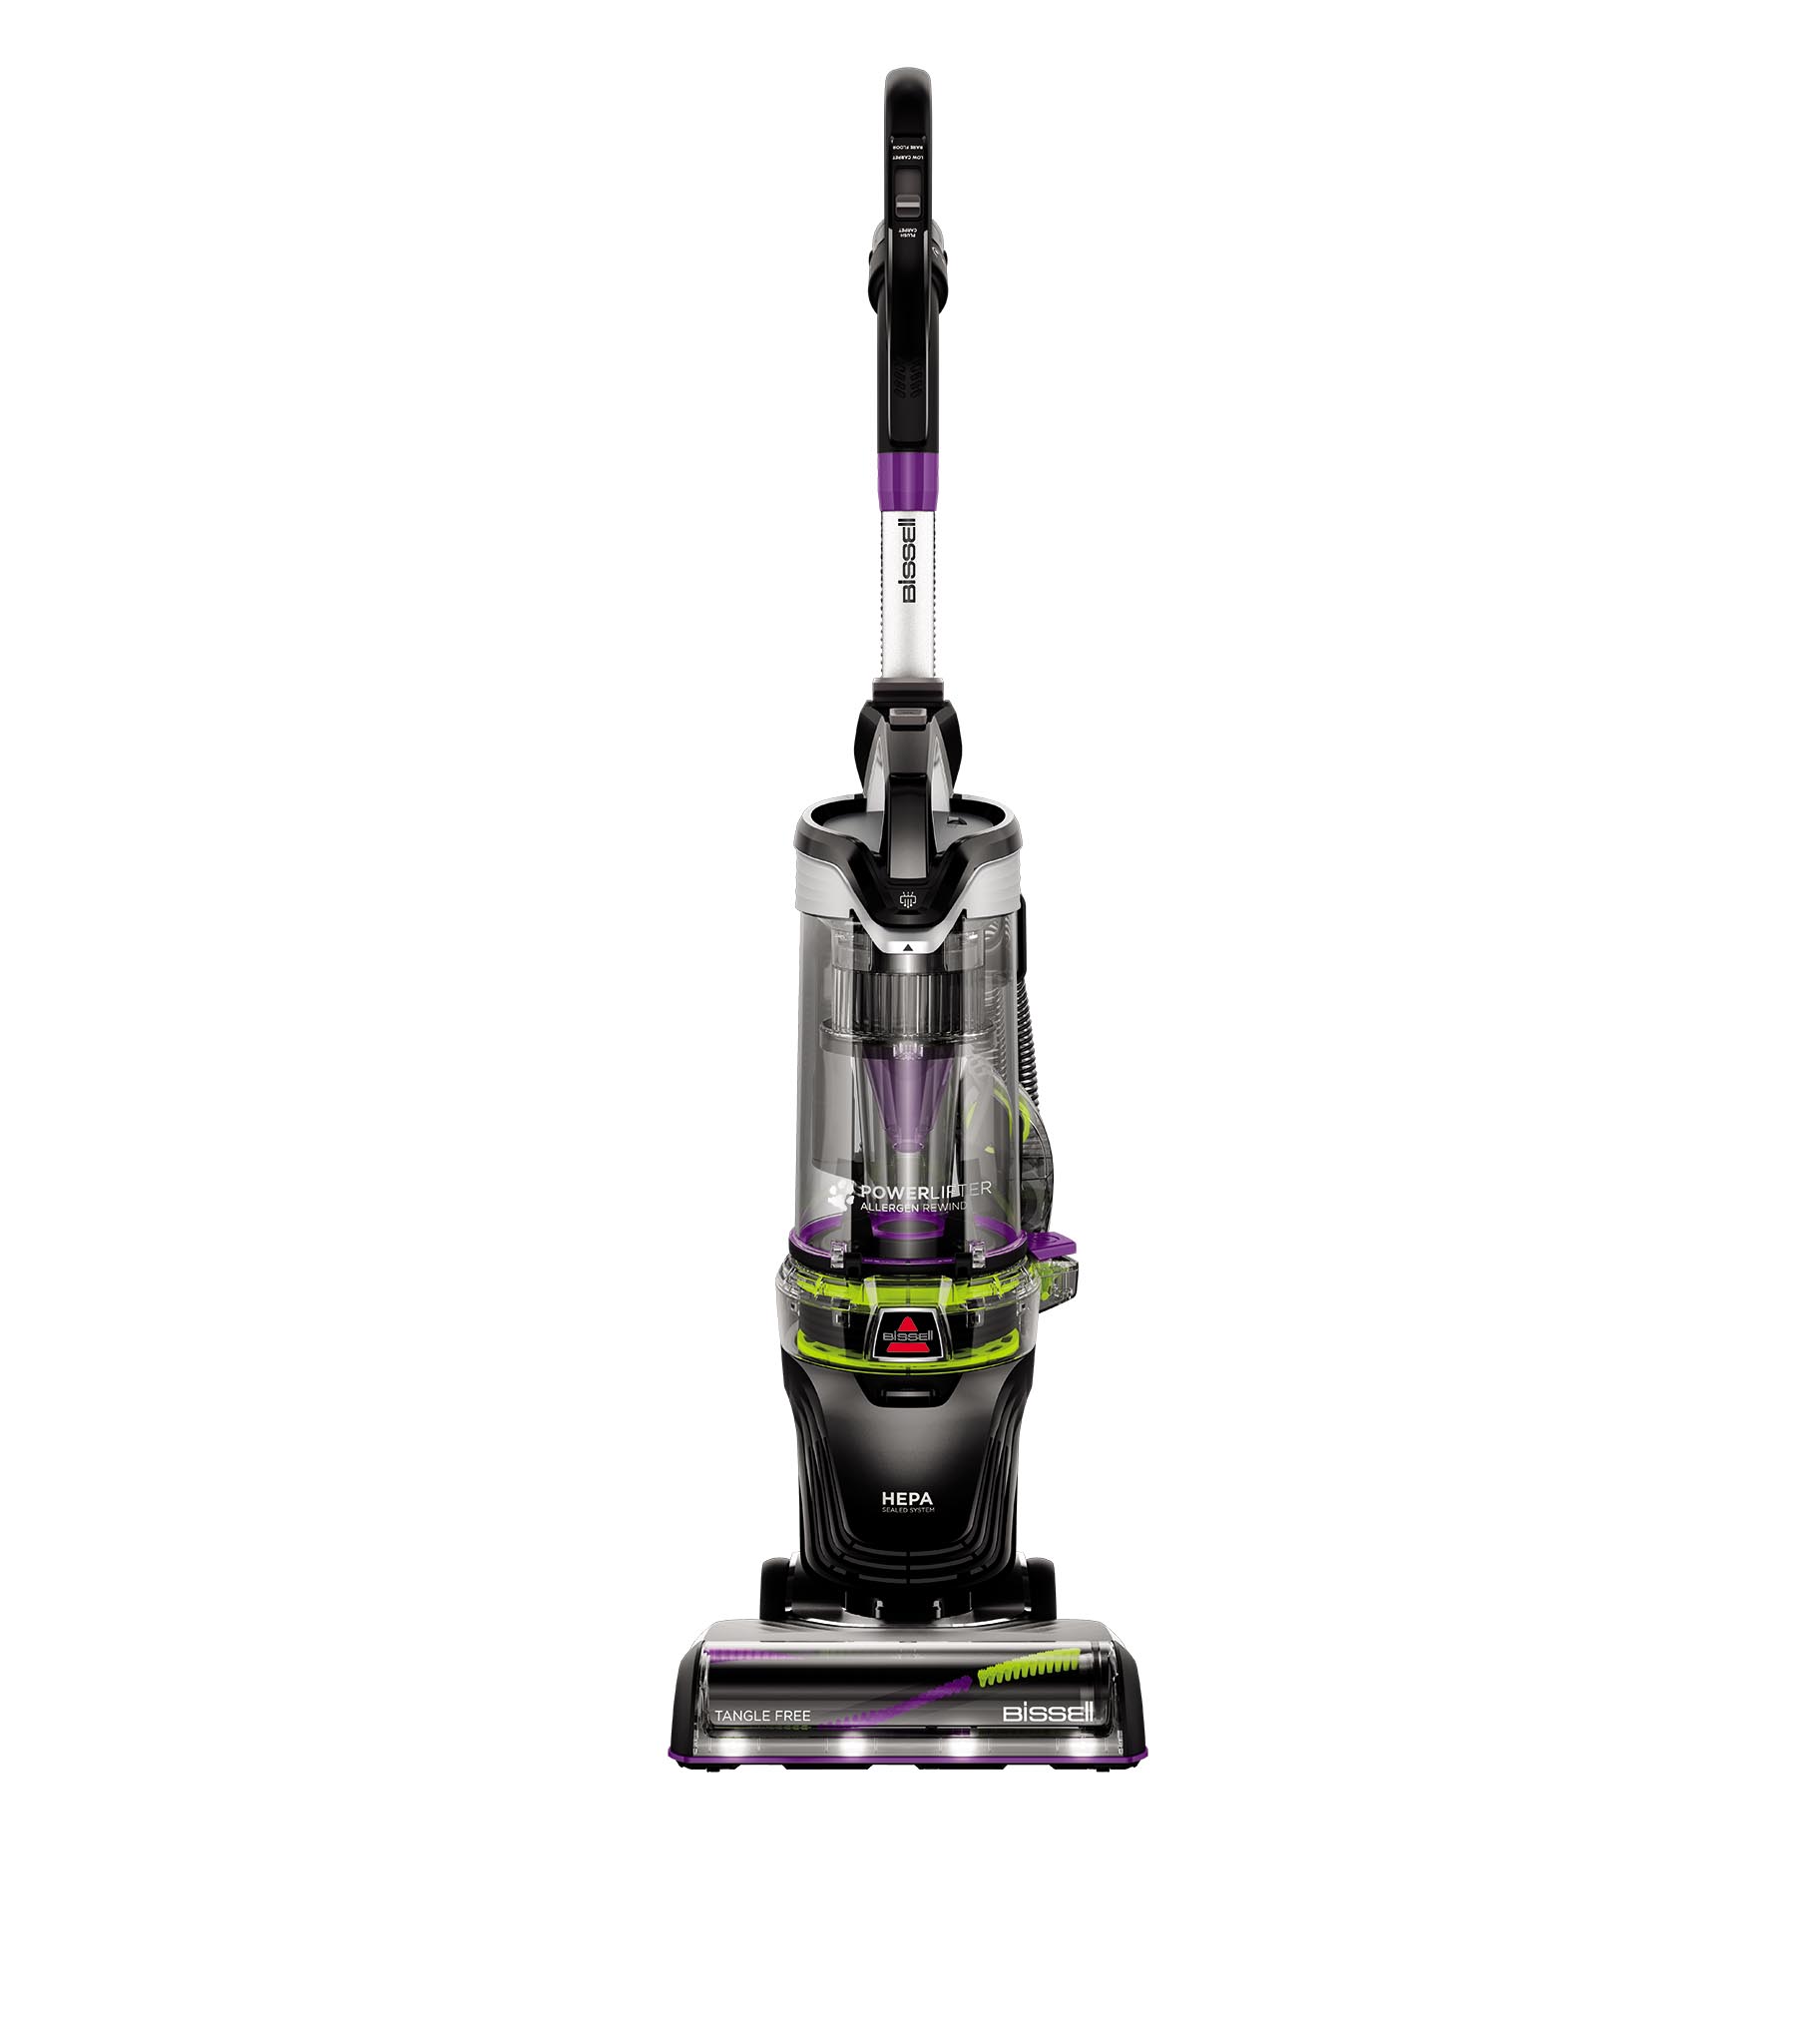 BISSELL PowerLifter Pet Rewind Bagless Upright Vacuum 3404 - image 2 of 8